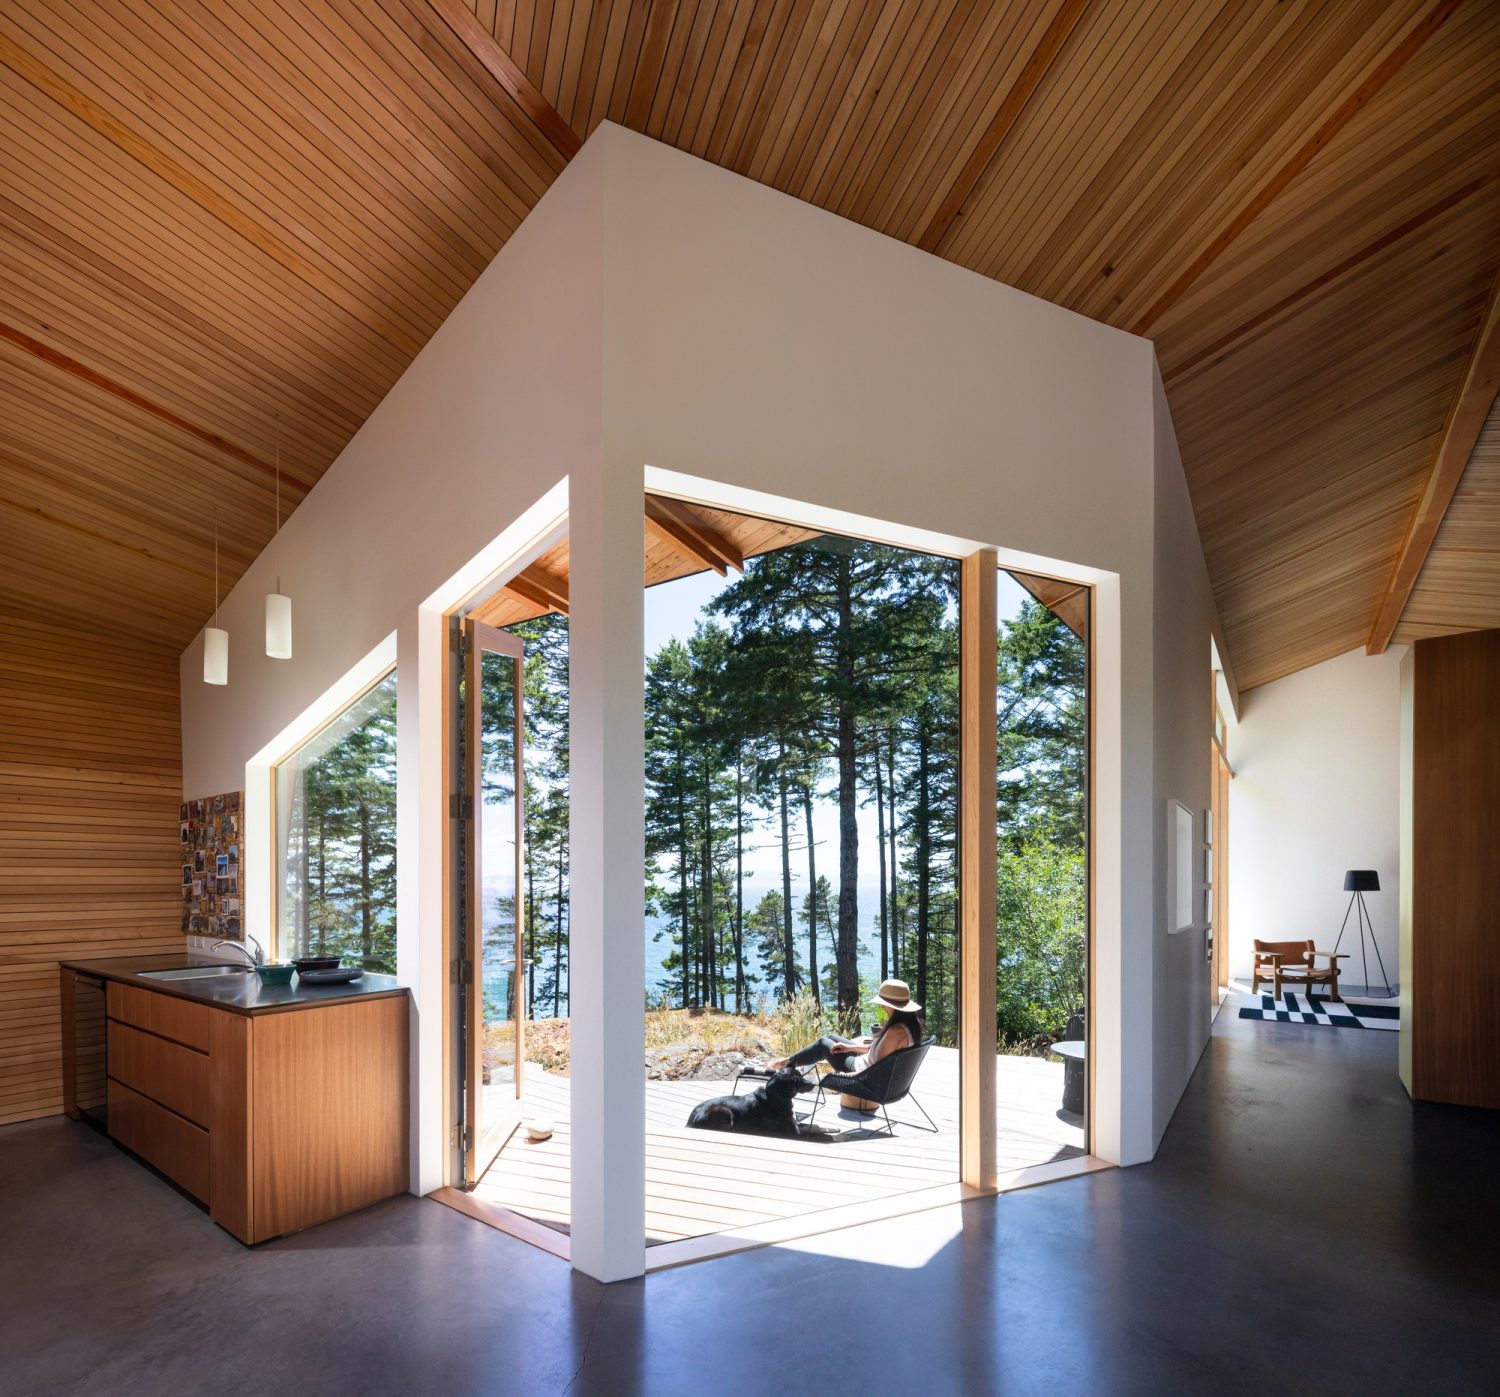 Sooke 01 House by Campos Studio